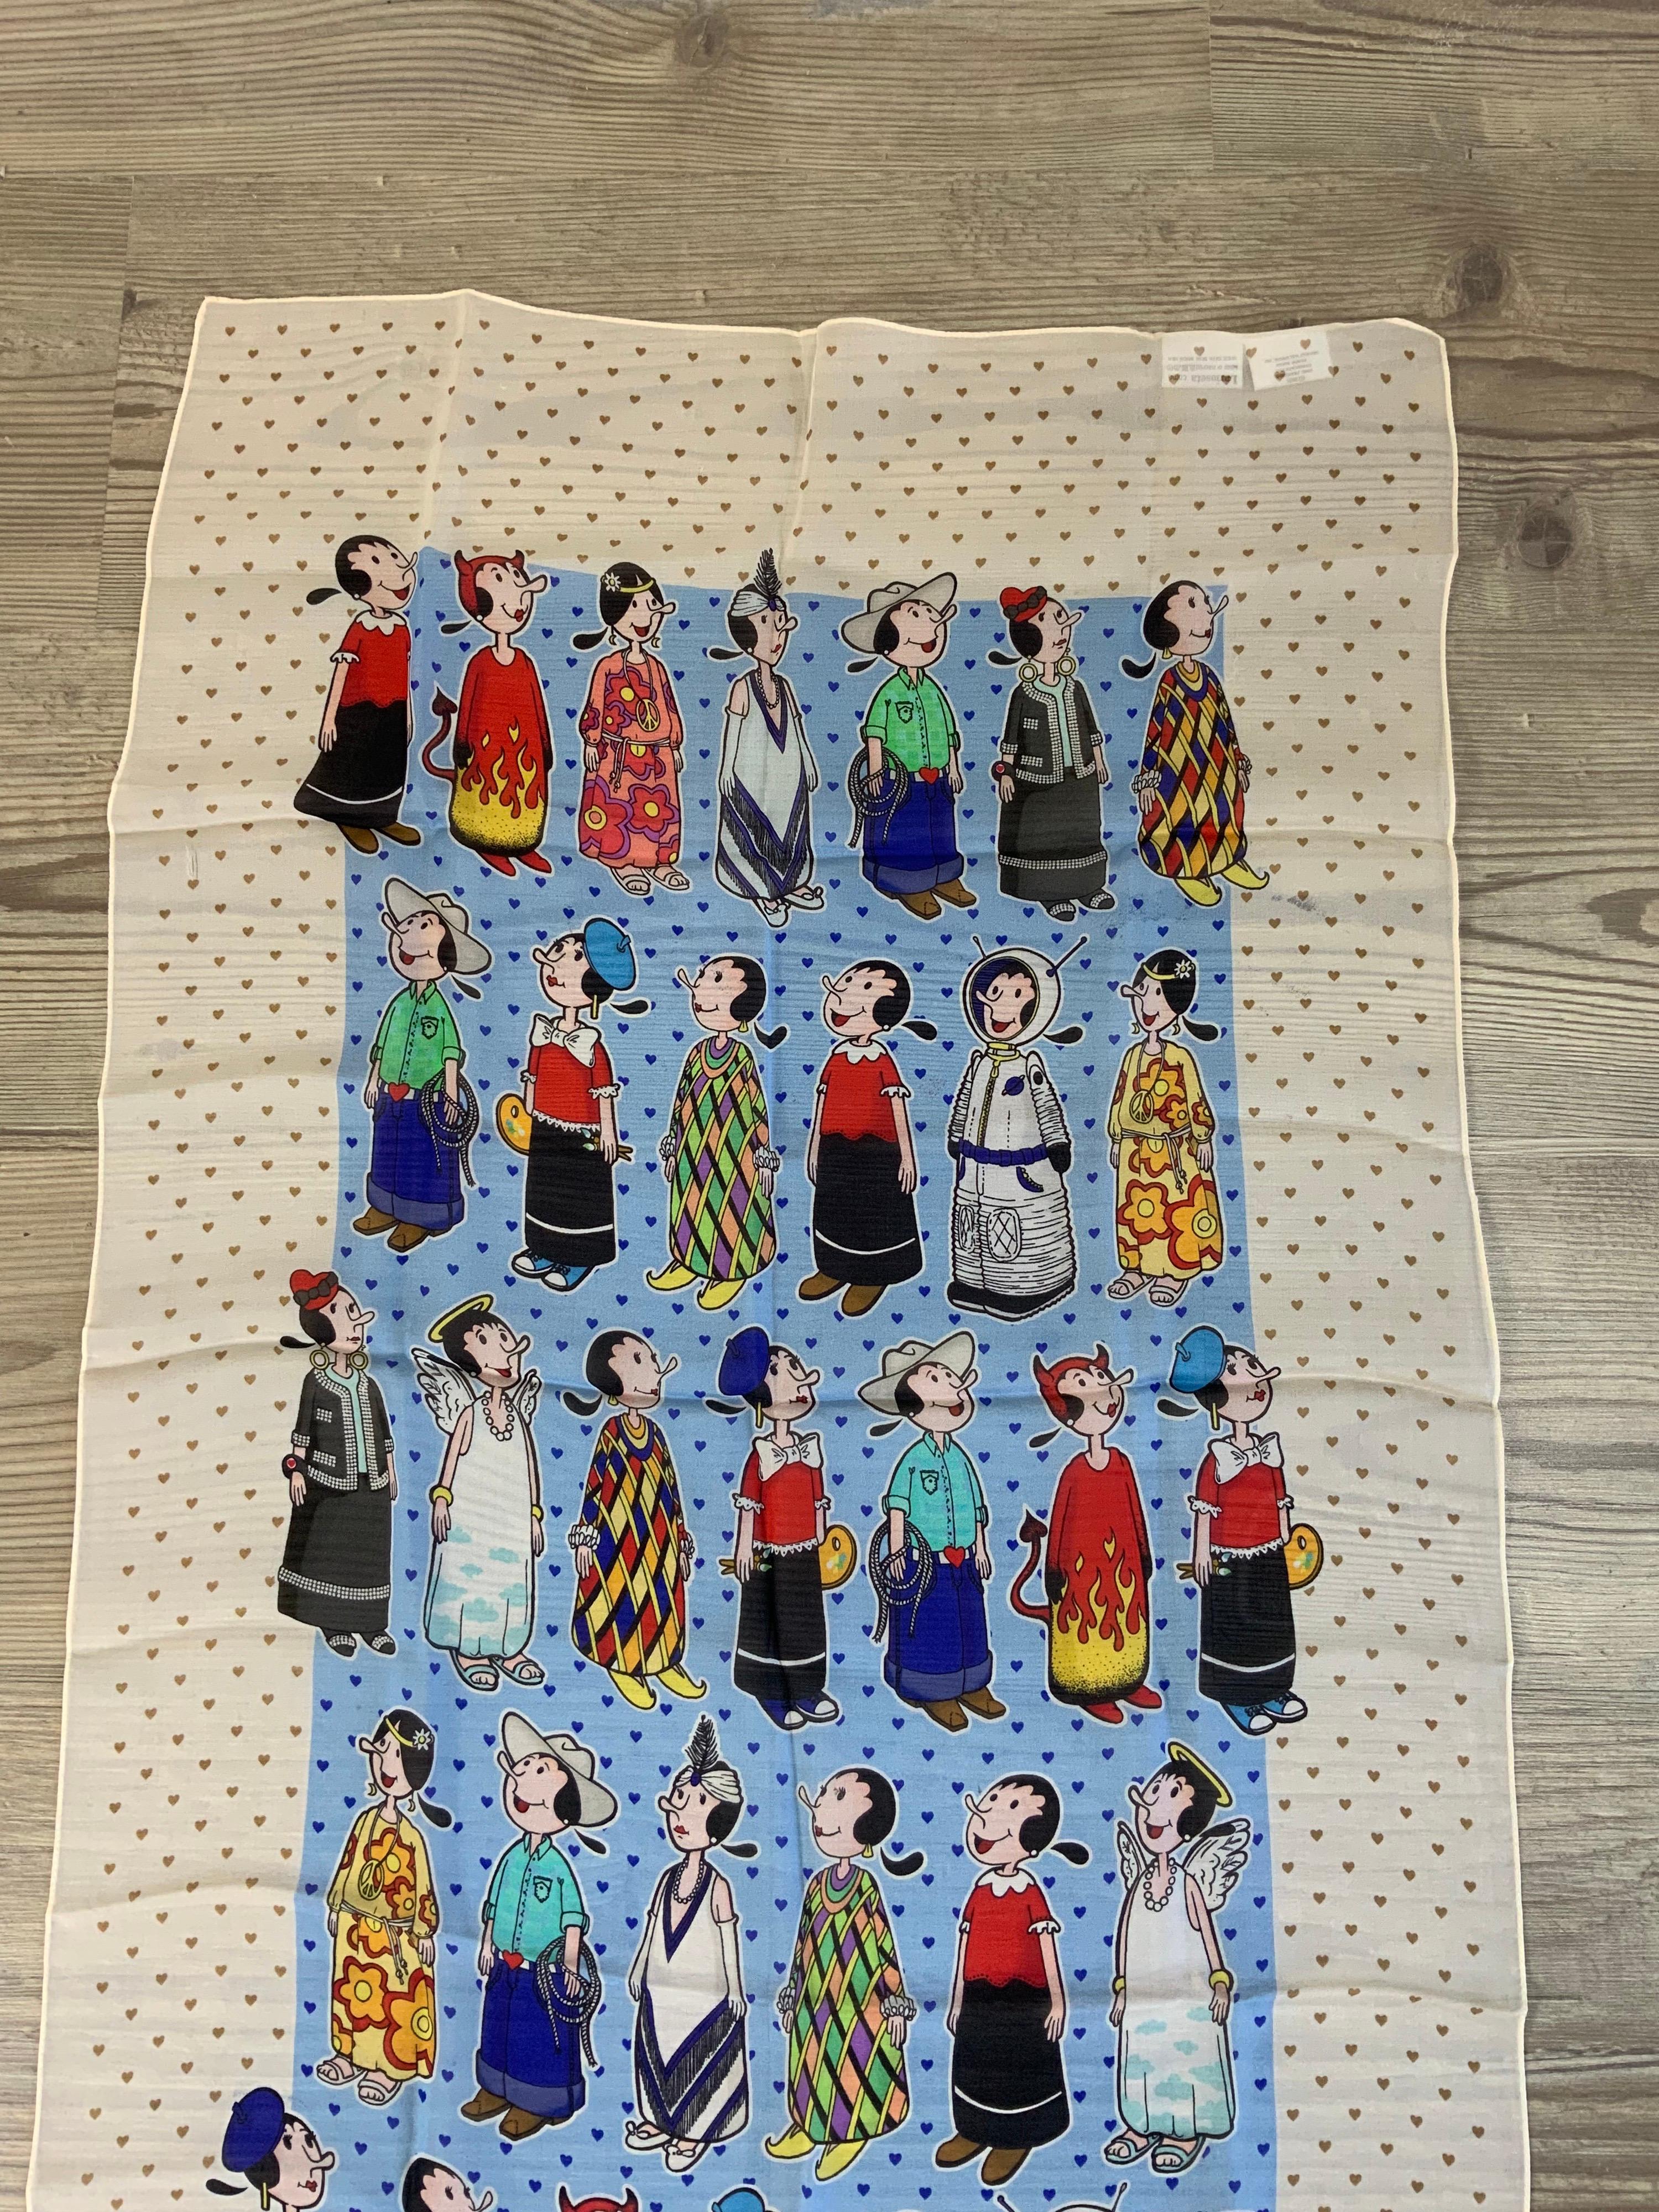 Moschino, Cheap & Chic vintage foulard. About 2000s.
Features Olive Oyl in different costumes. Vibrant colors. 
100% silk by Larioseta Como. Made in Italy 
Measurements:
160 cm X 47 cm
Conditions: Good - Previously owned and gently worn, with little